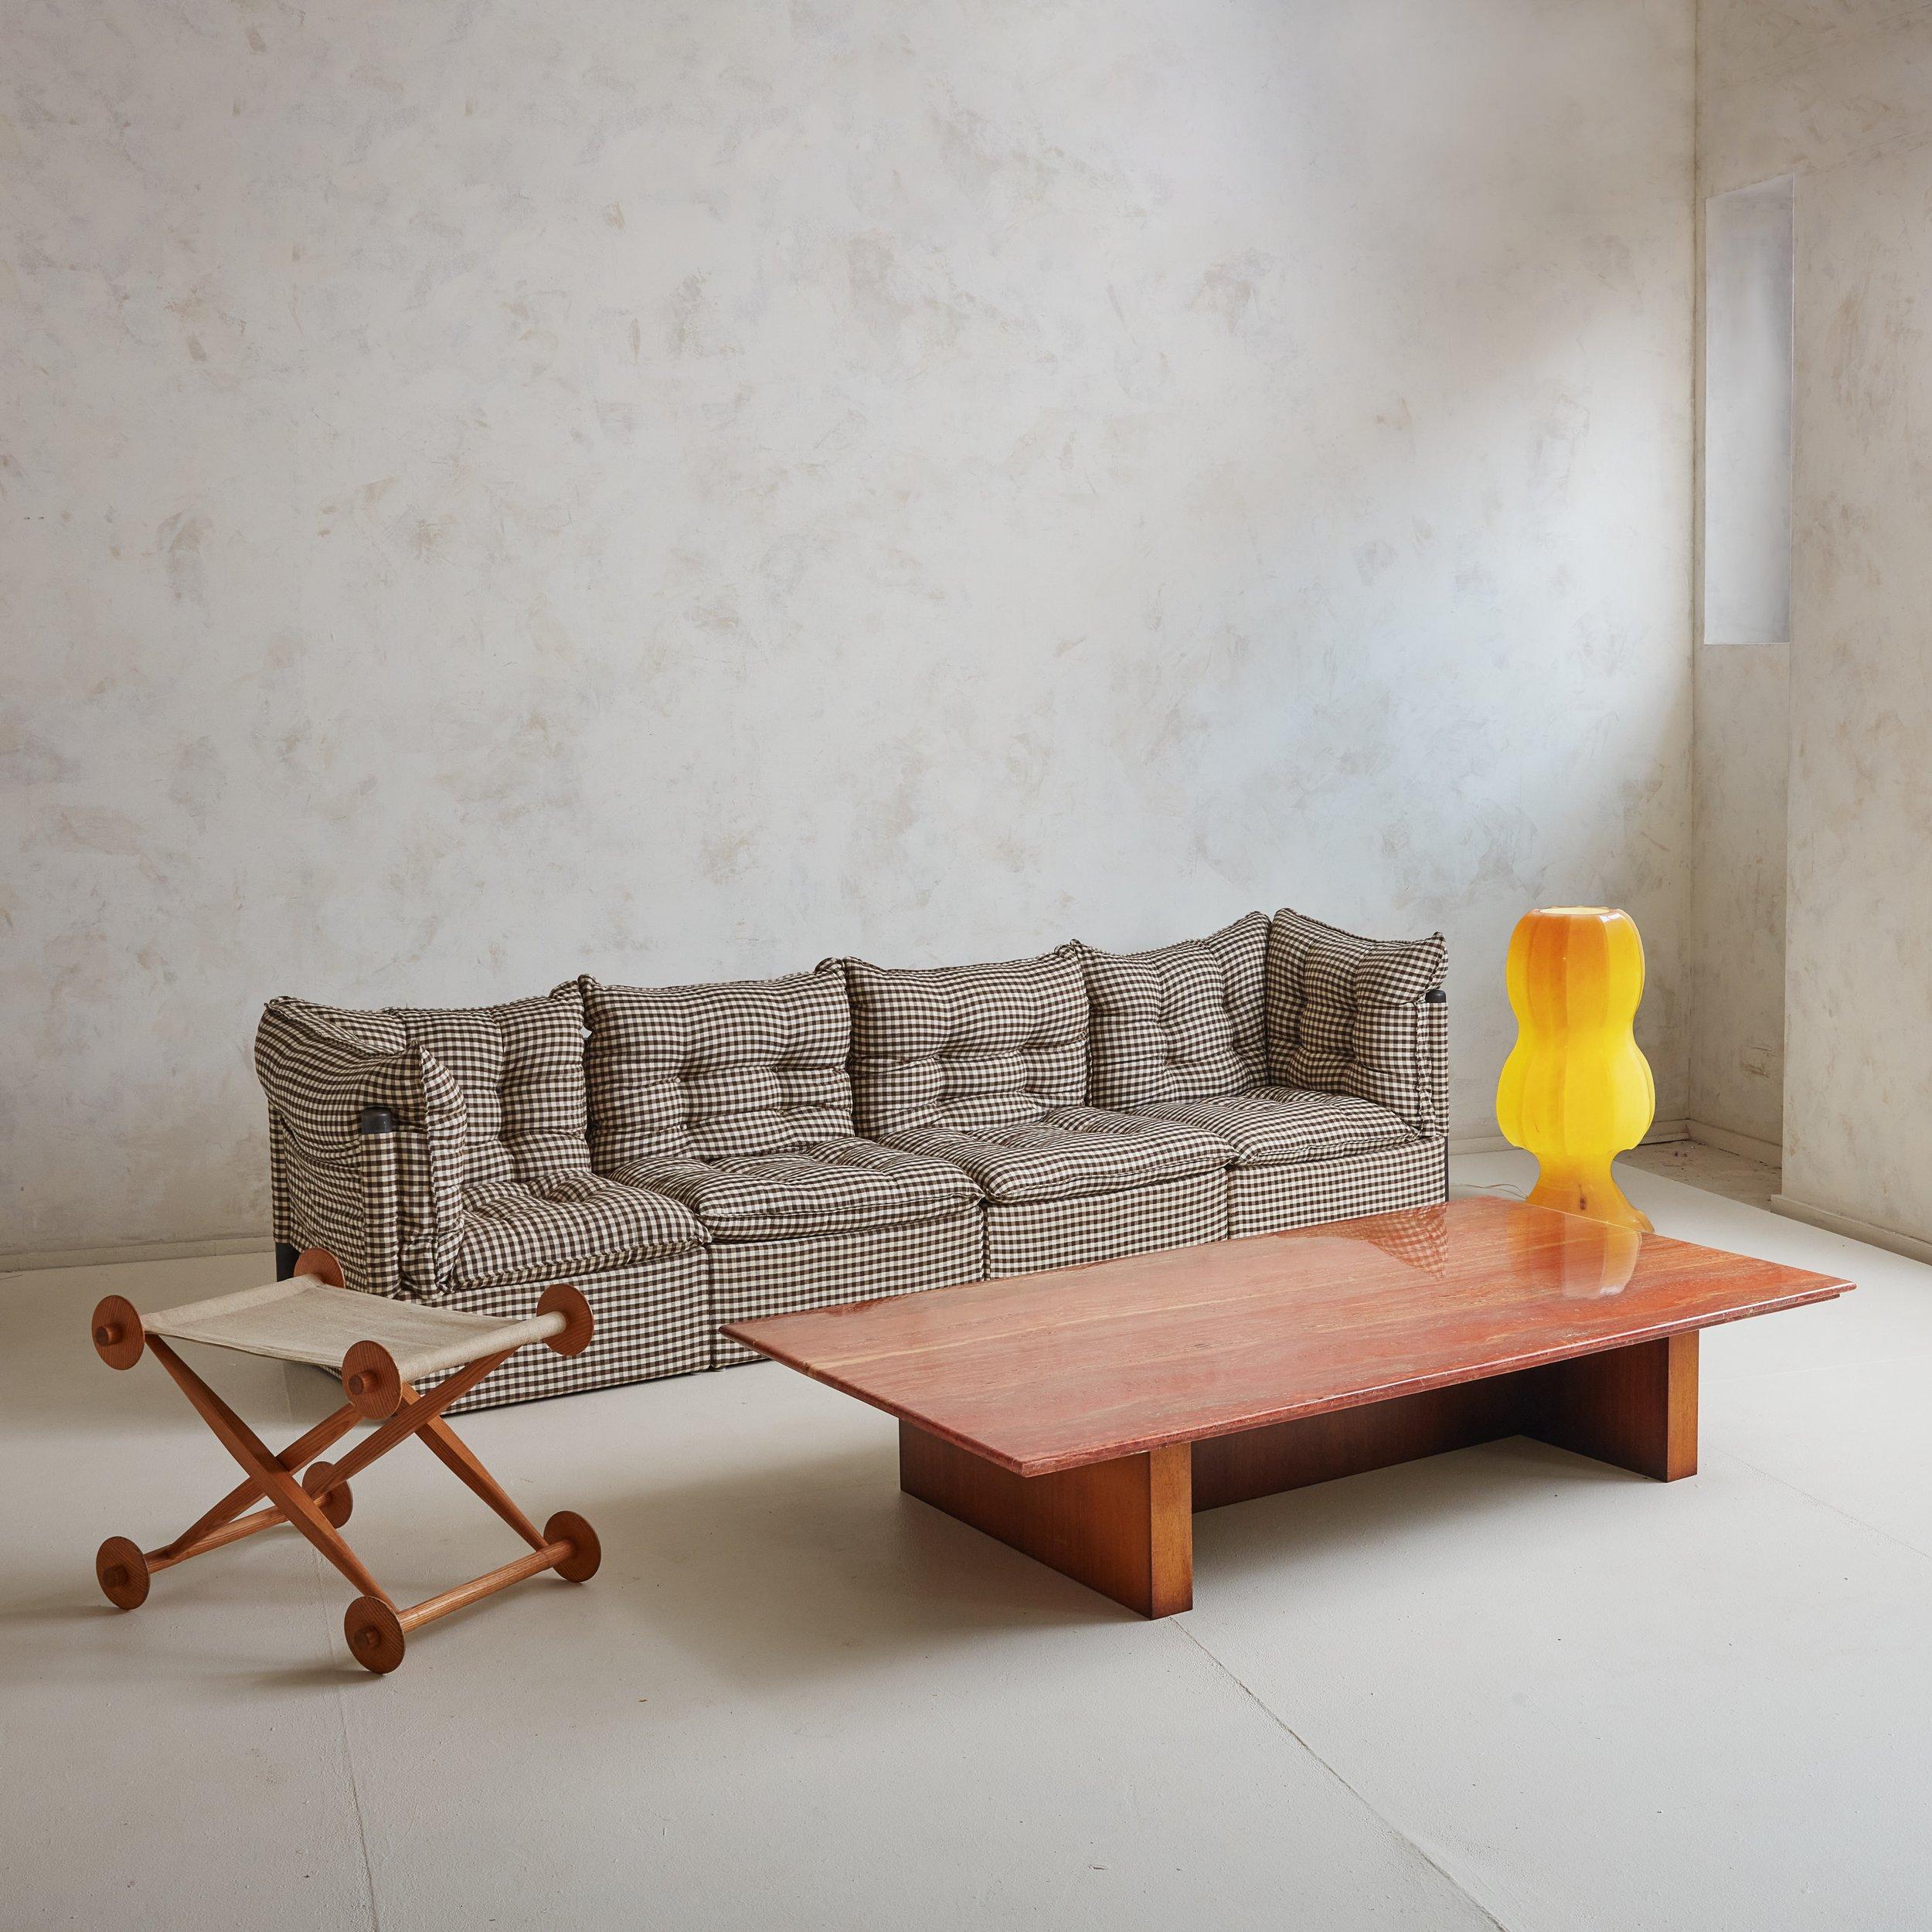 A modern rectangular coffee table constructed of a rare variation of red travertine with a polished finish. Veining is present throughout in hues of orange, coral, and taupe. The travertine top extends over a wooden “H” shaped base, providing